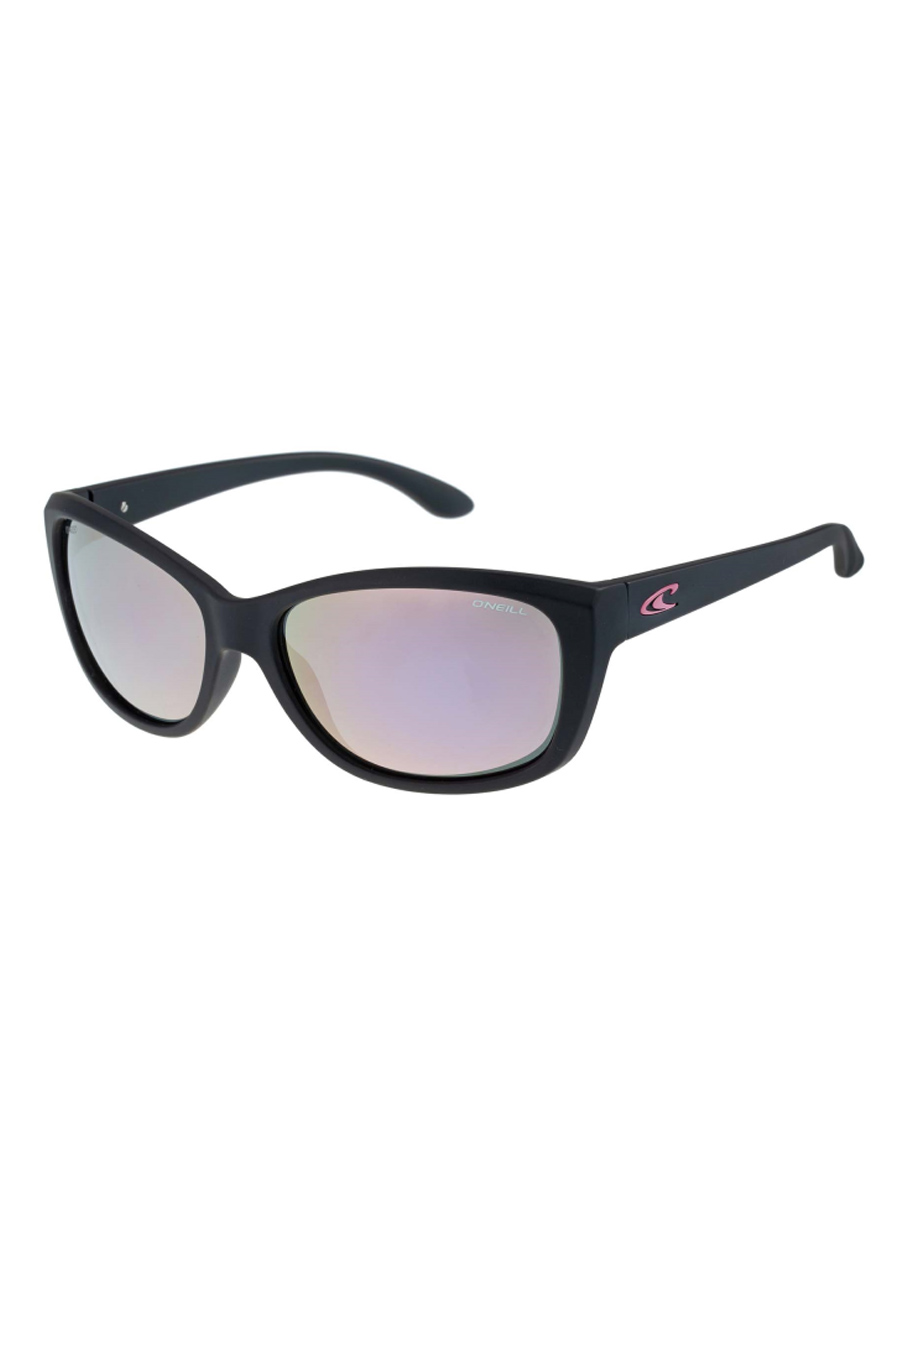 Saulesbrilles ONEILL ONS-9032-20-104P